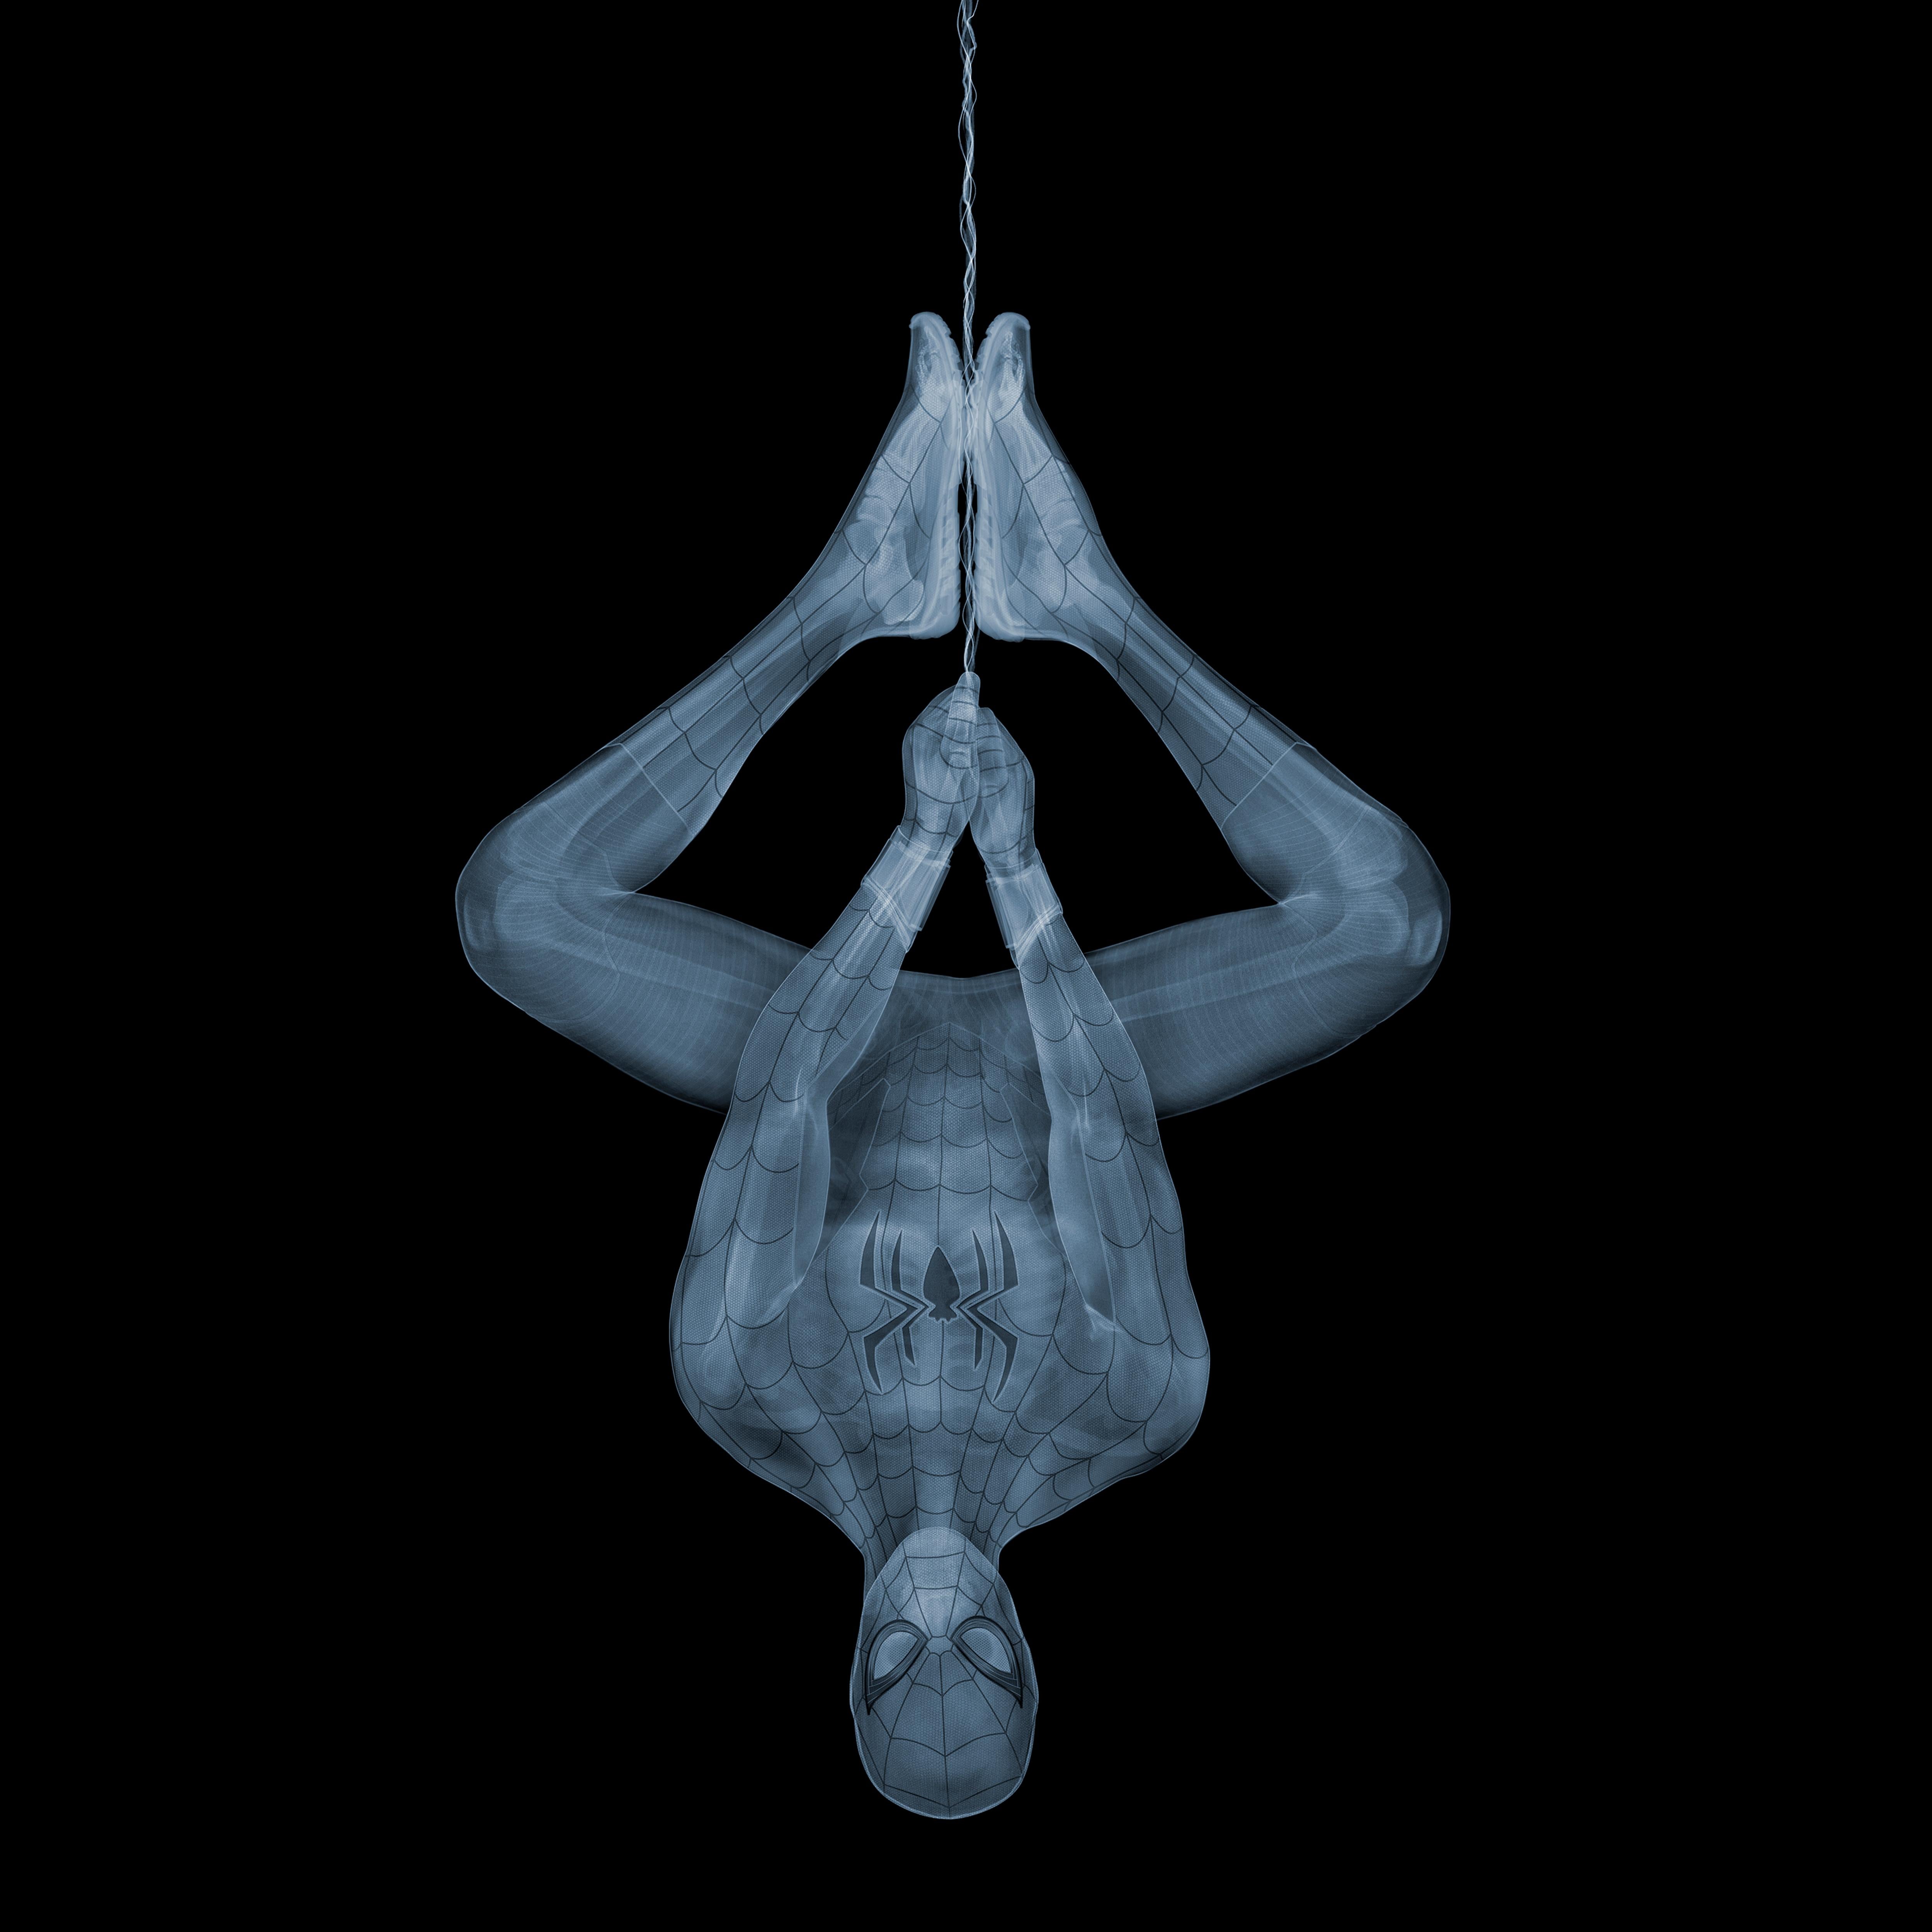 Nick Veasey Black and White Photograph - Spider Man